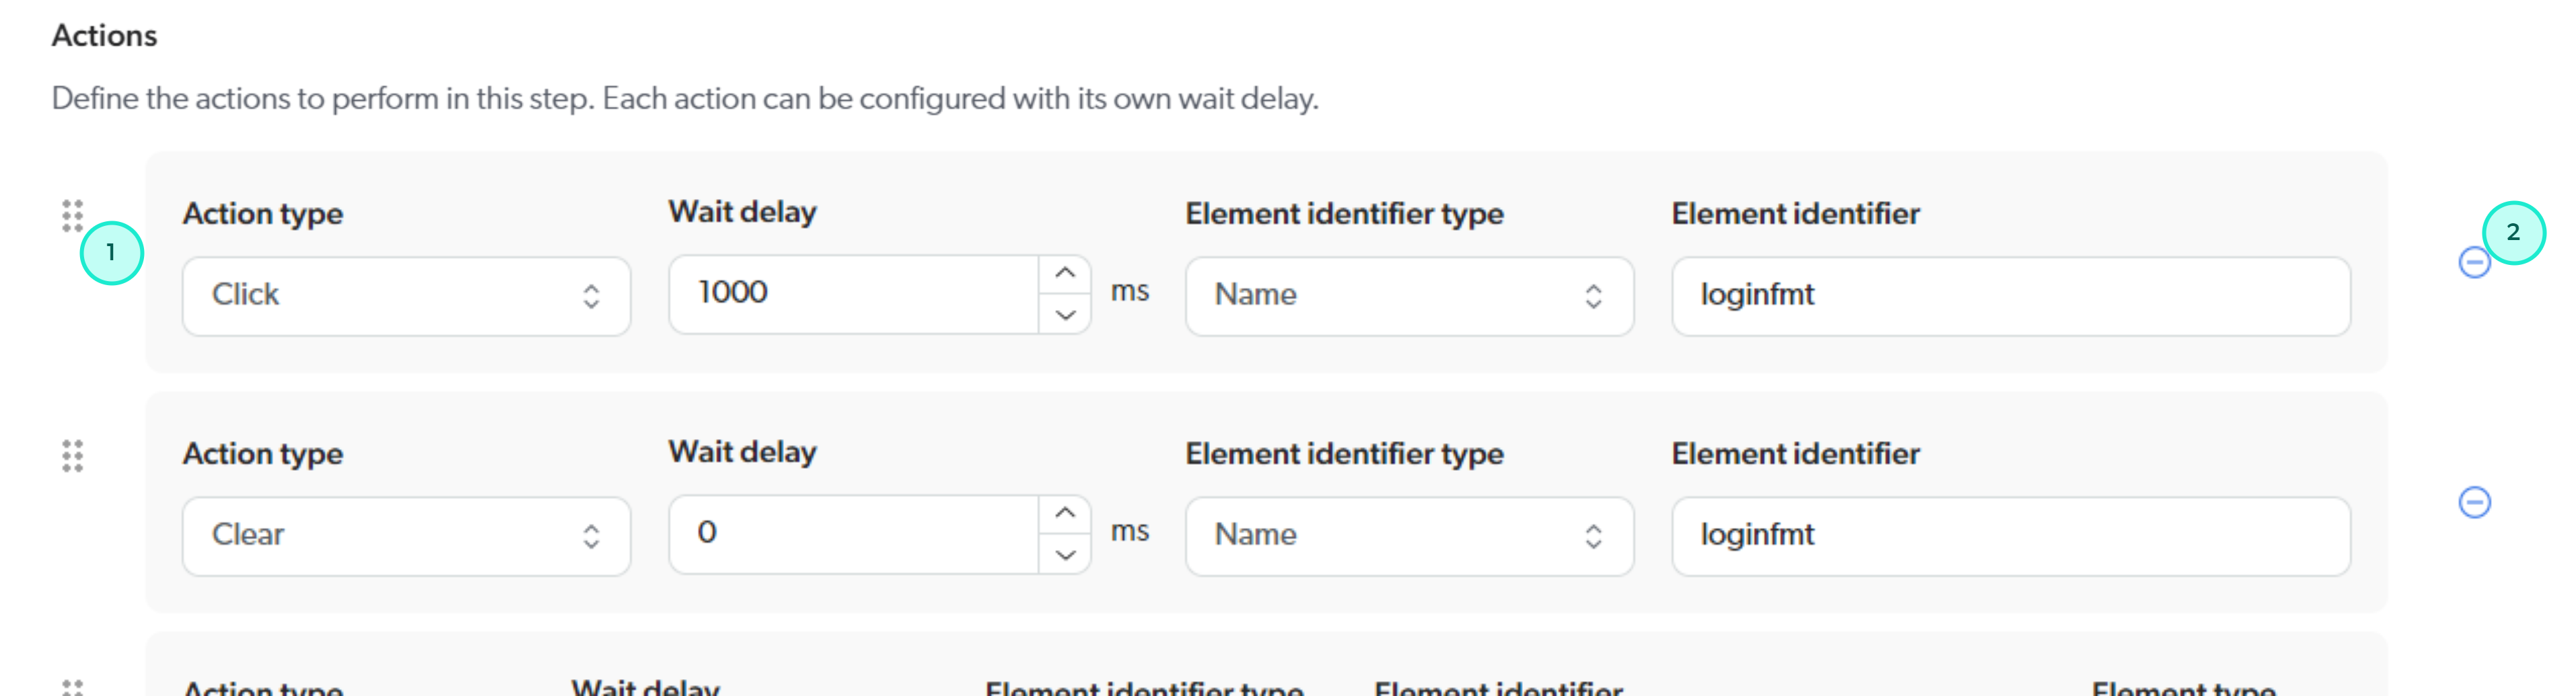 Manage actions in a custom login sequence step | Coveo